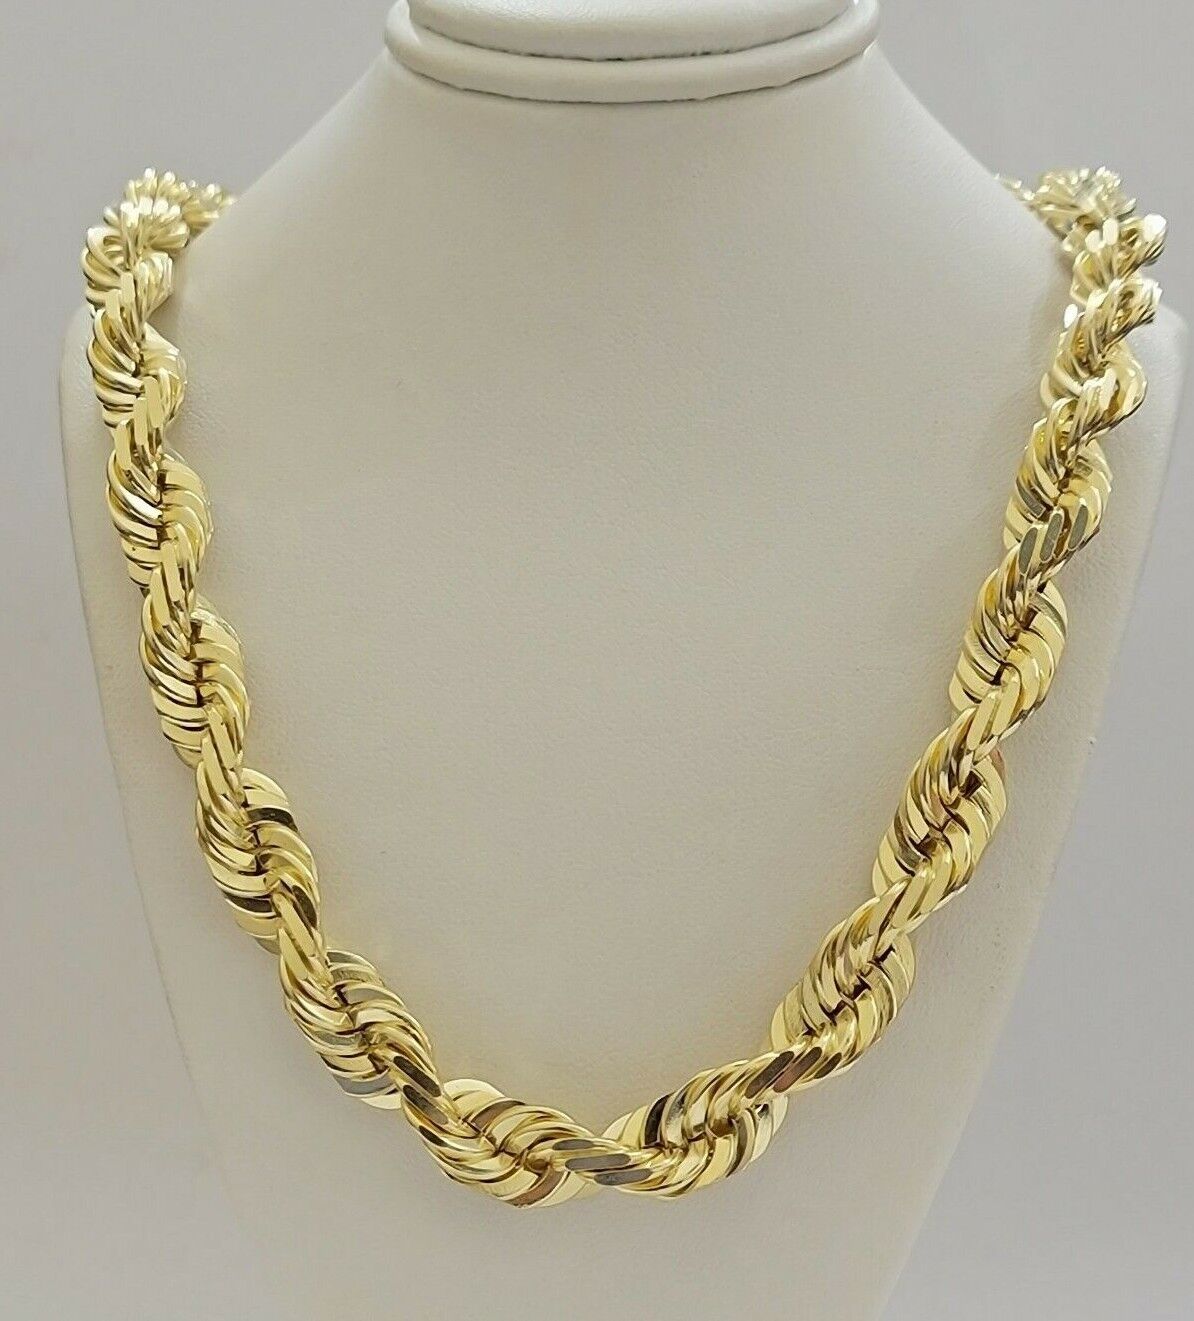 14mm Solid 10K Yellow Gold Rope Chain Necklace 28 inch Mens Thick & Heavy Shiny